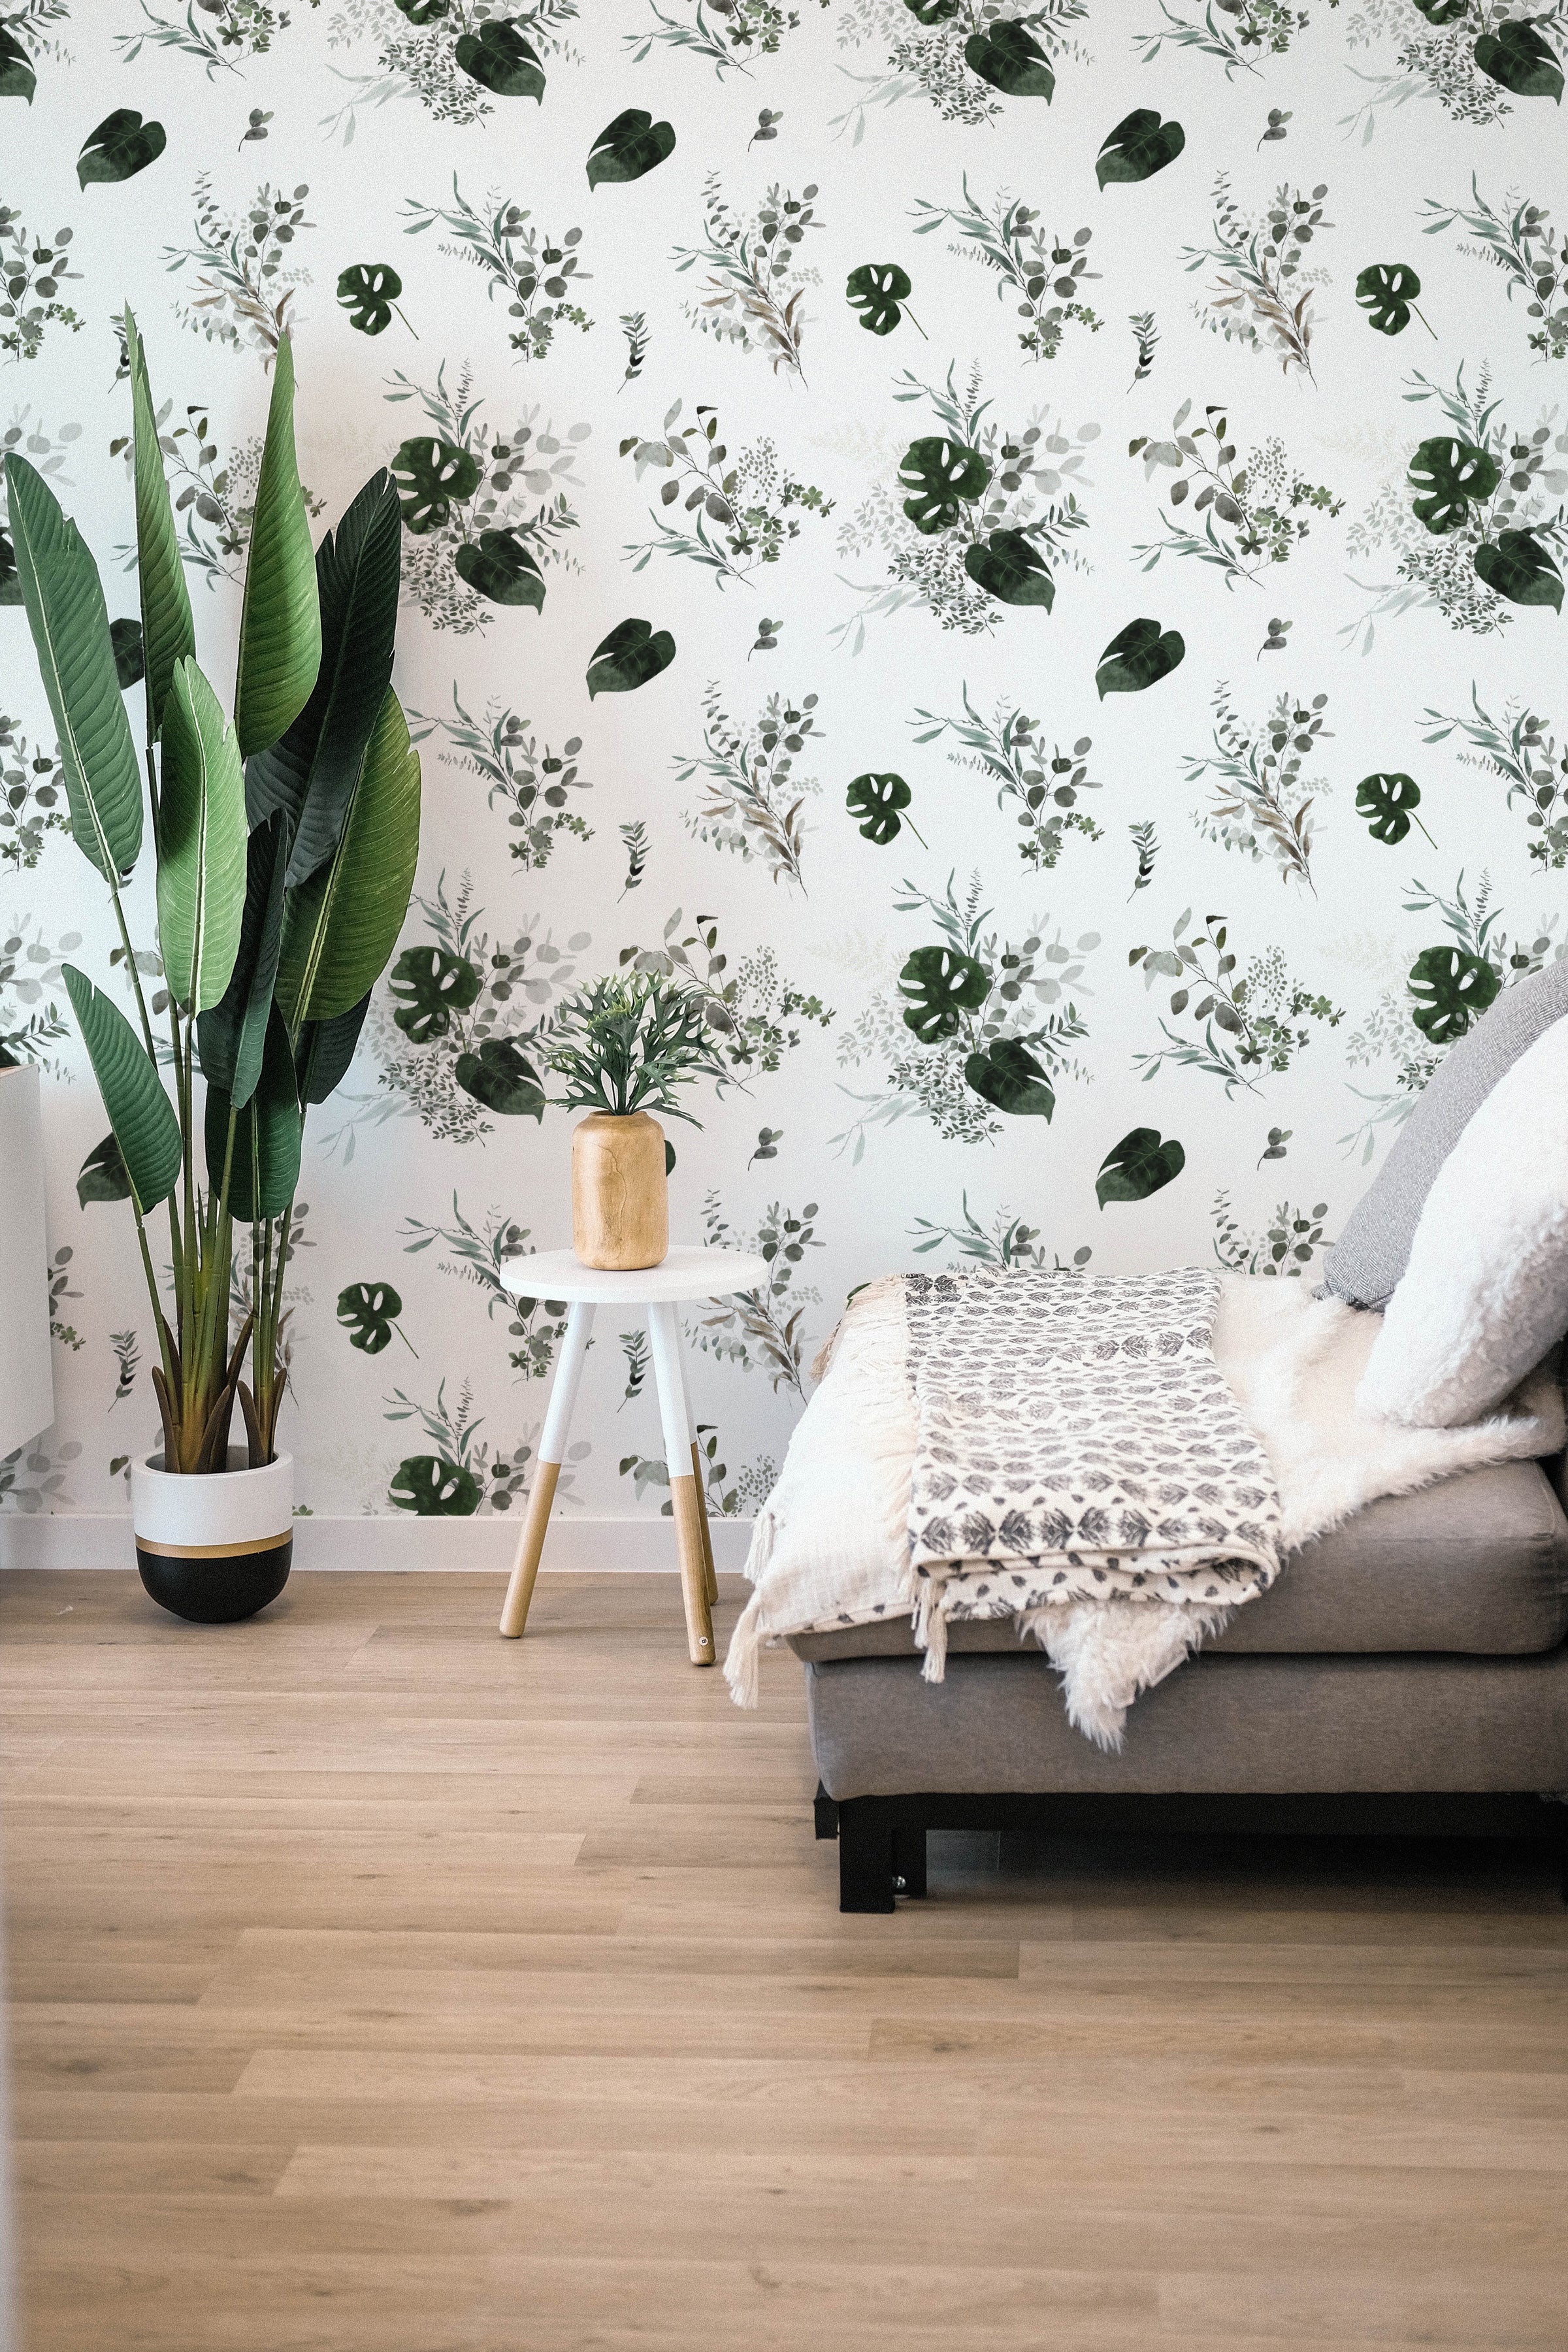 A well-appointed living space showcasing the Tropical Greenery Wallpaper, featuring an array of lush green botanical prints including monstera leaves and fine herbs against a soft white background. A cozy beige sofa adorned with a textured throw and complemented by a large indoor plant enhances the room's natural vibe.